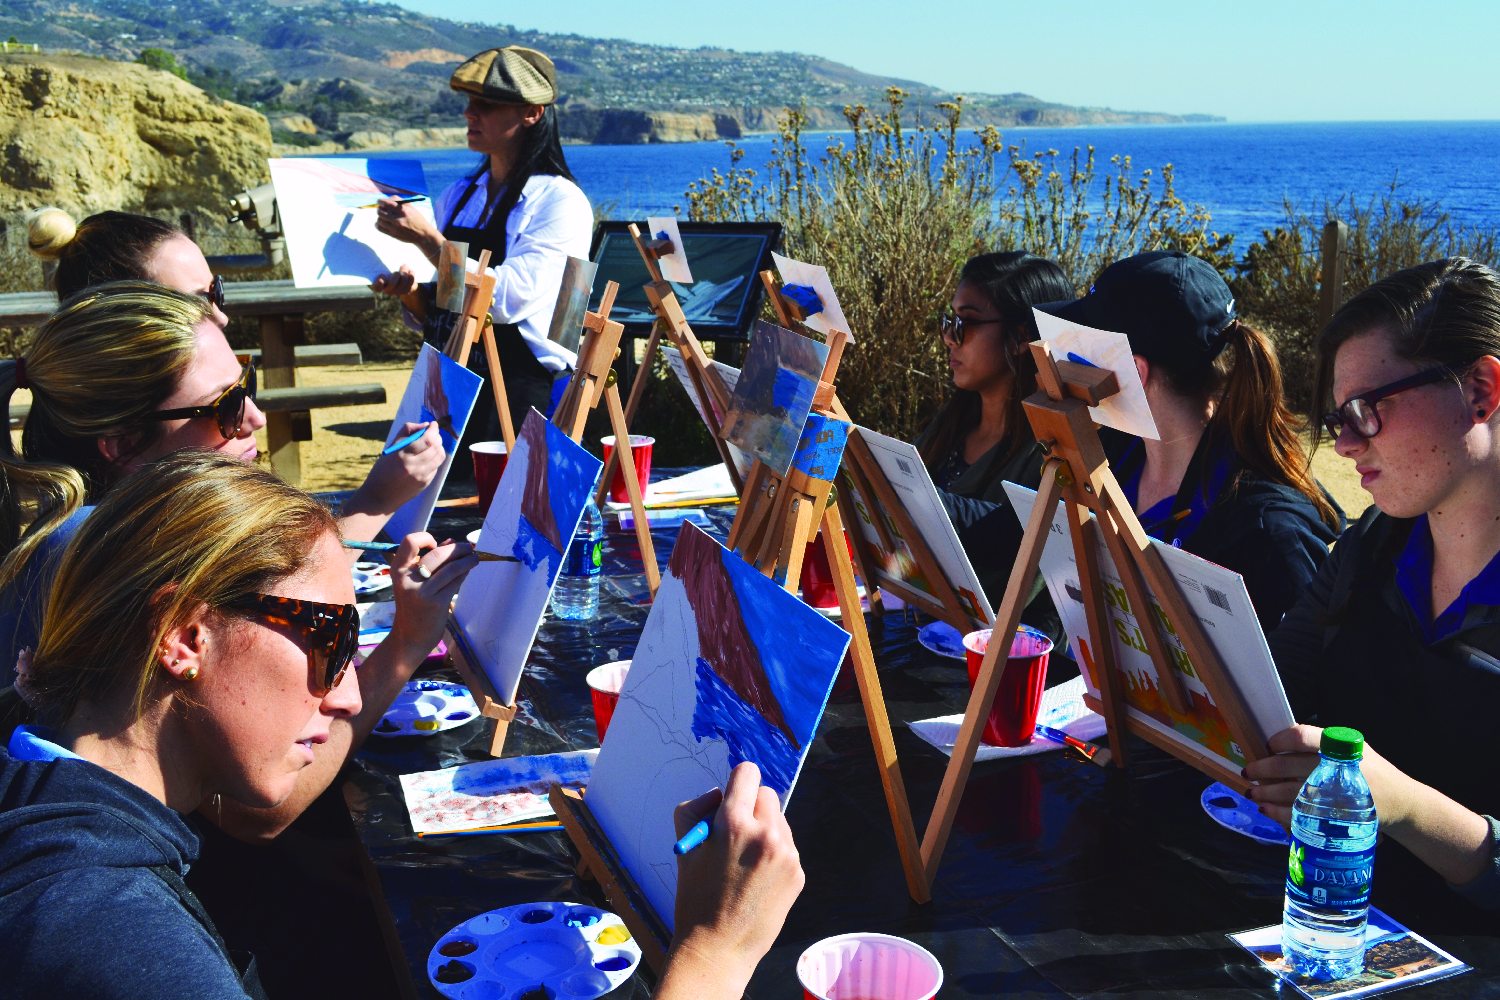 Associates Painting by The Sea